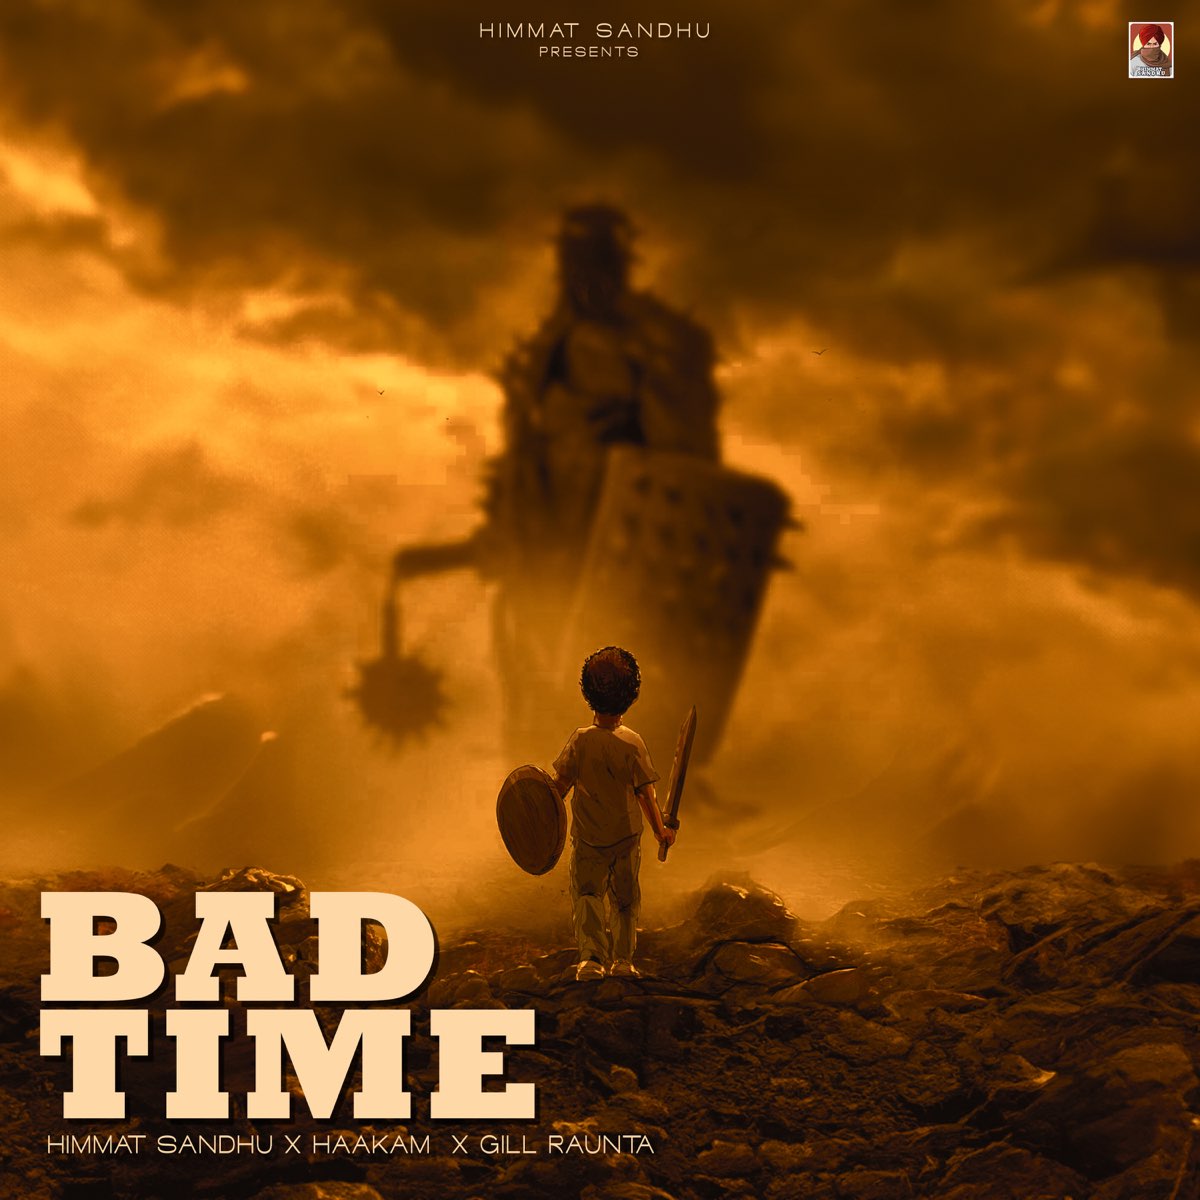 Ready go to ... https://music.apple.com/in/album/bad-time-single/1736730692 [ Bad Time - Single by Himmat Sandhu, Gill Raunta & Haakam on Apple Music]